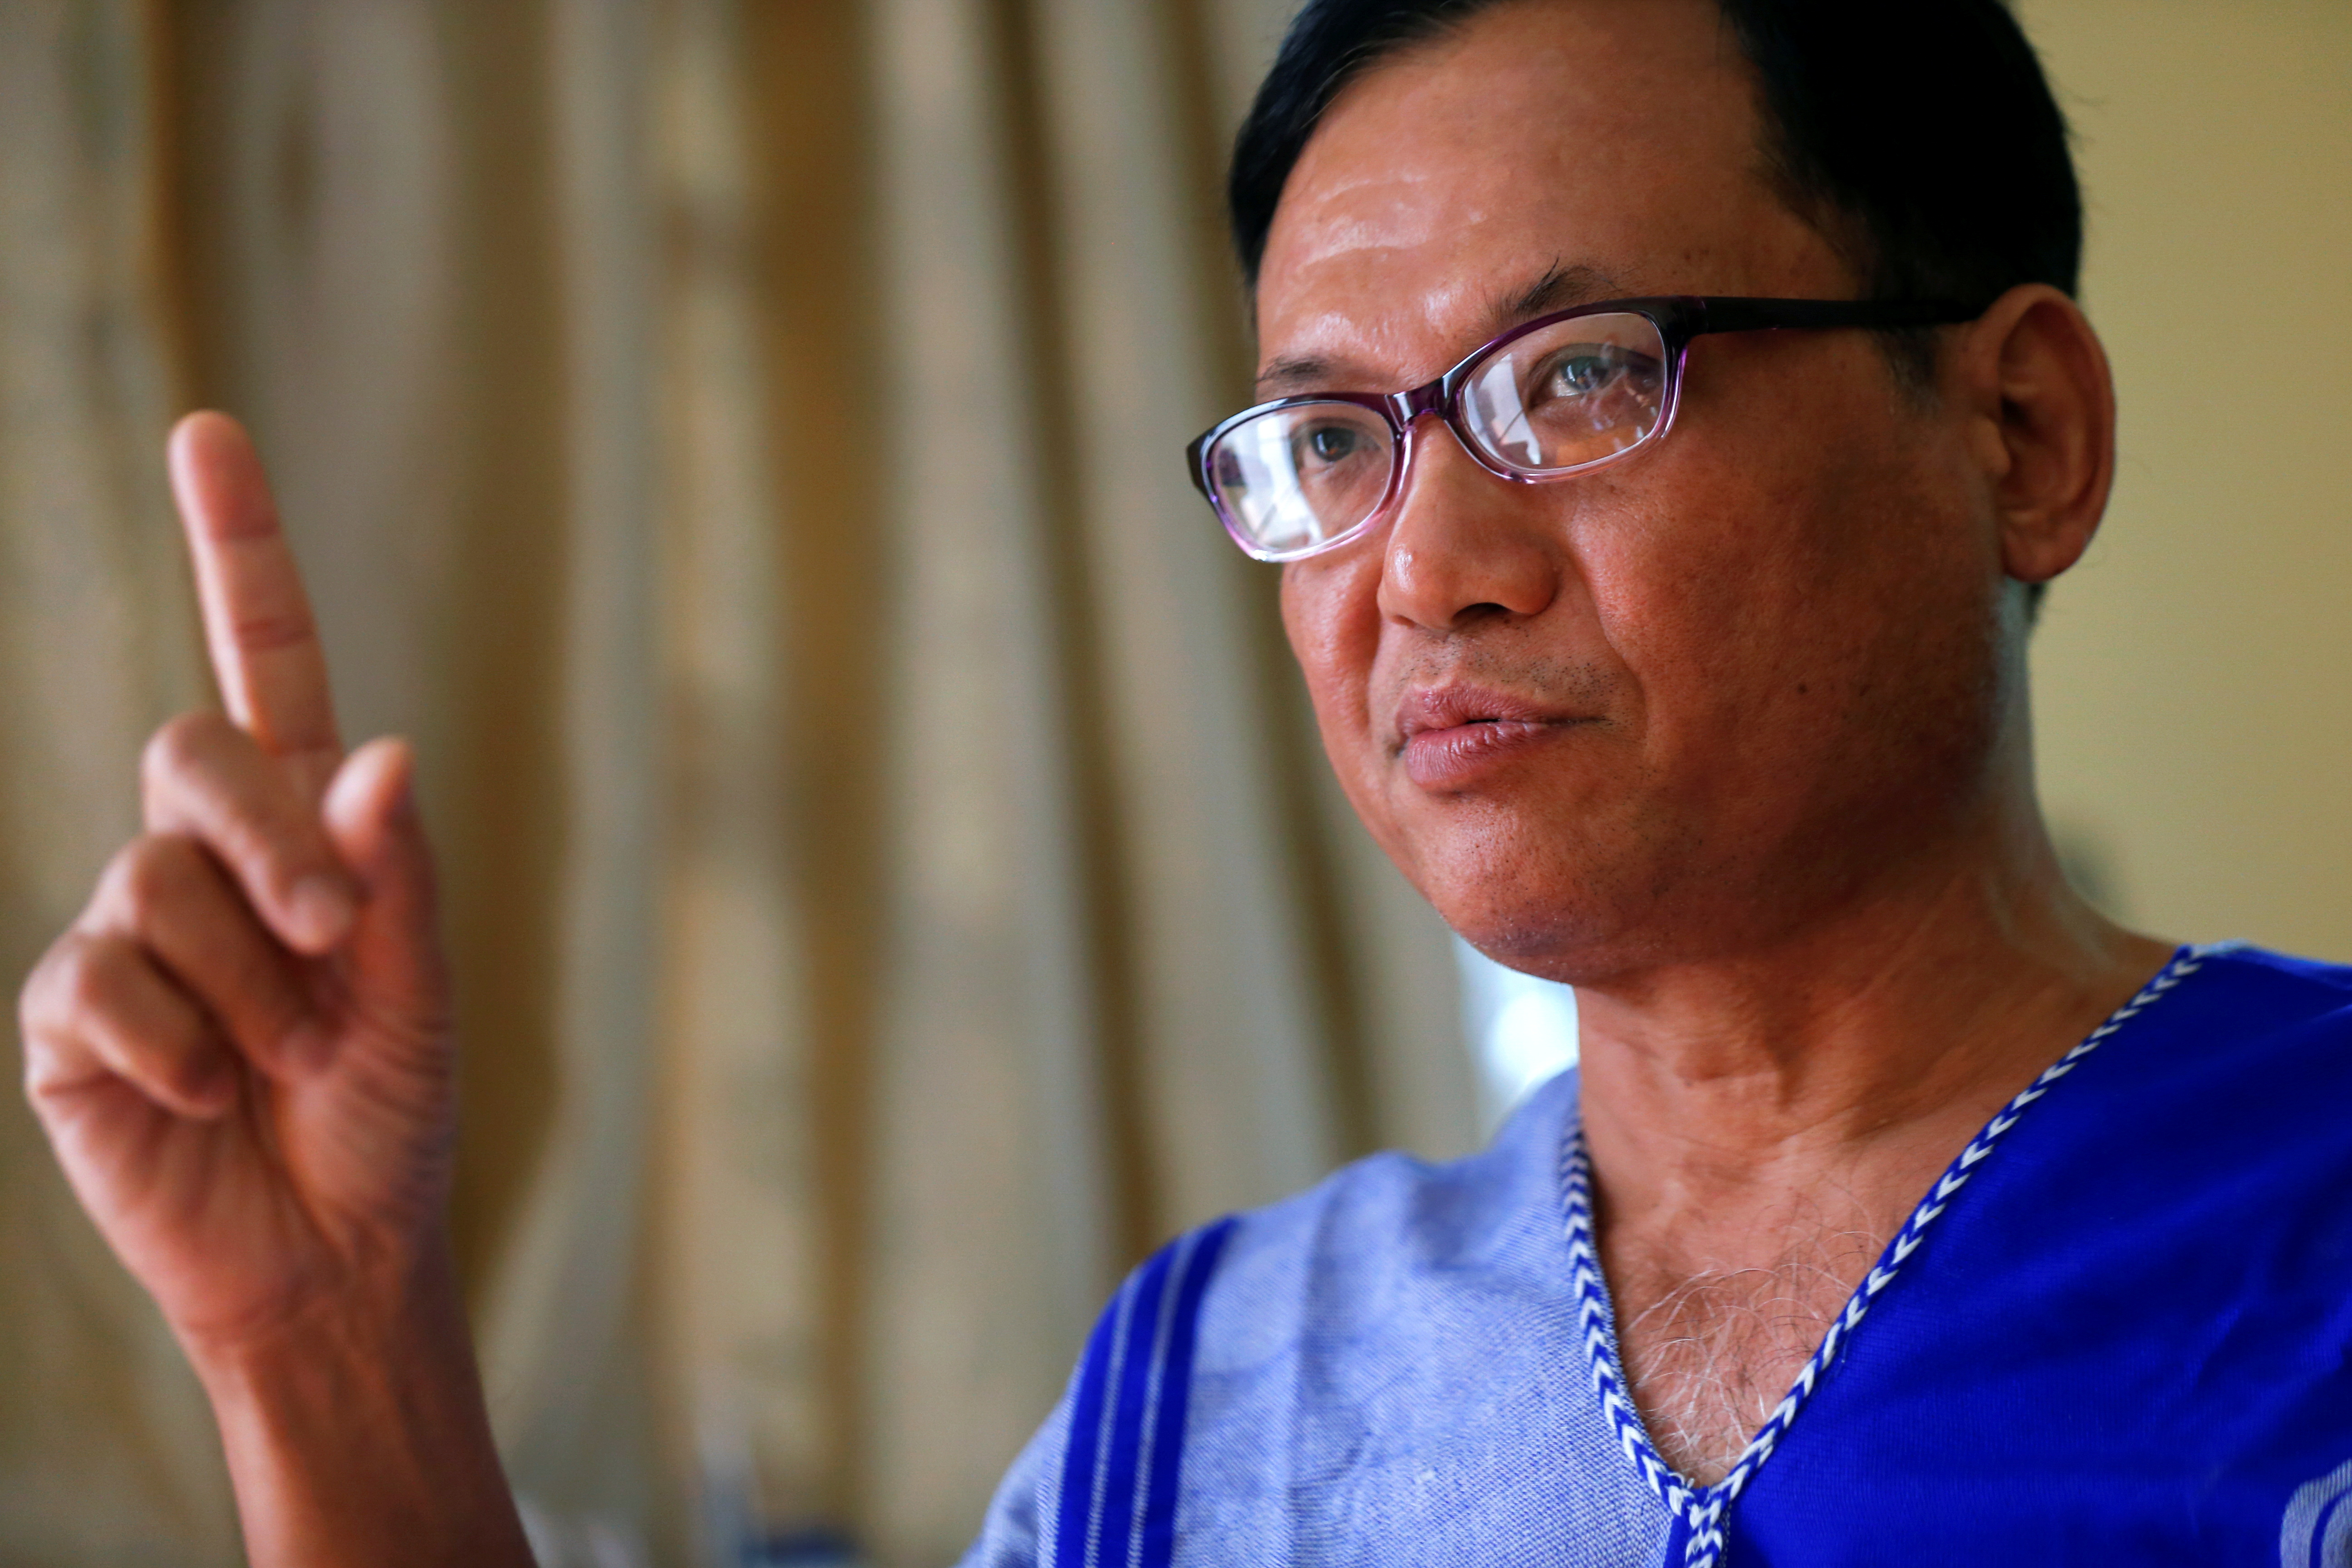 Padoh Saw Taw Nee, Head of Foreign Affairs Department of the Karen National Union, one of the major ethnic armed groups from Myanmar talks during an interview with Reuters journalist in Mae Sot, Thailand March 18, 2021. REUTERS/Soe Zeya Tun/File Photo